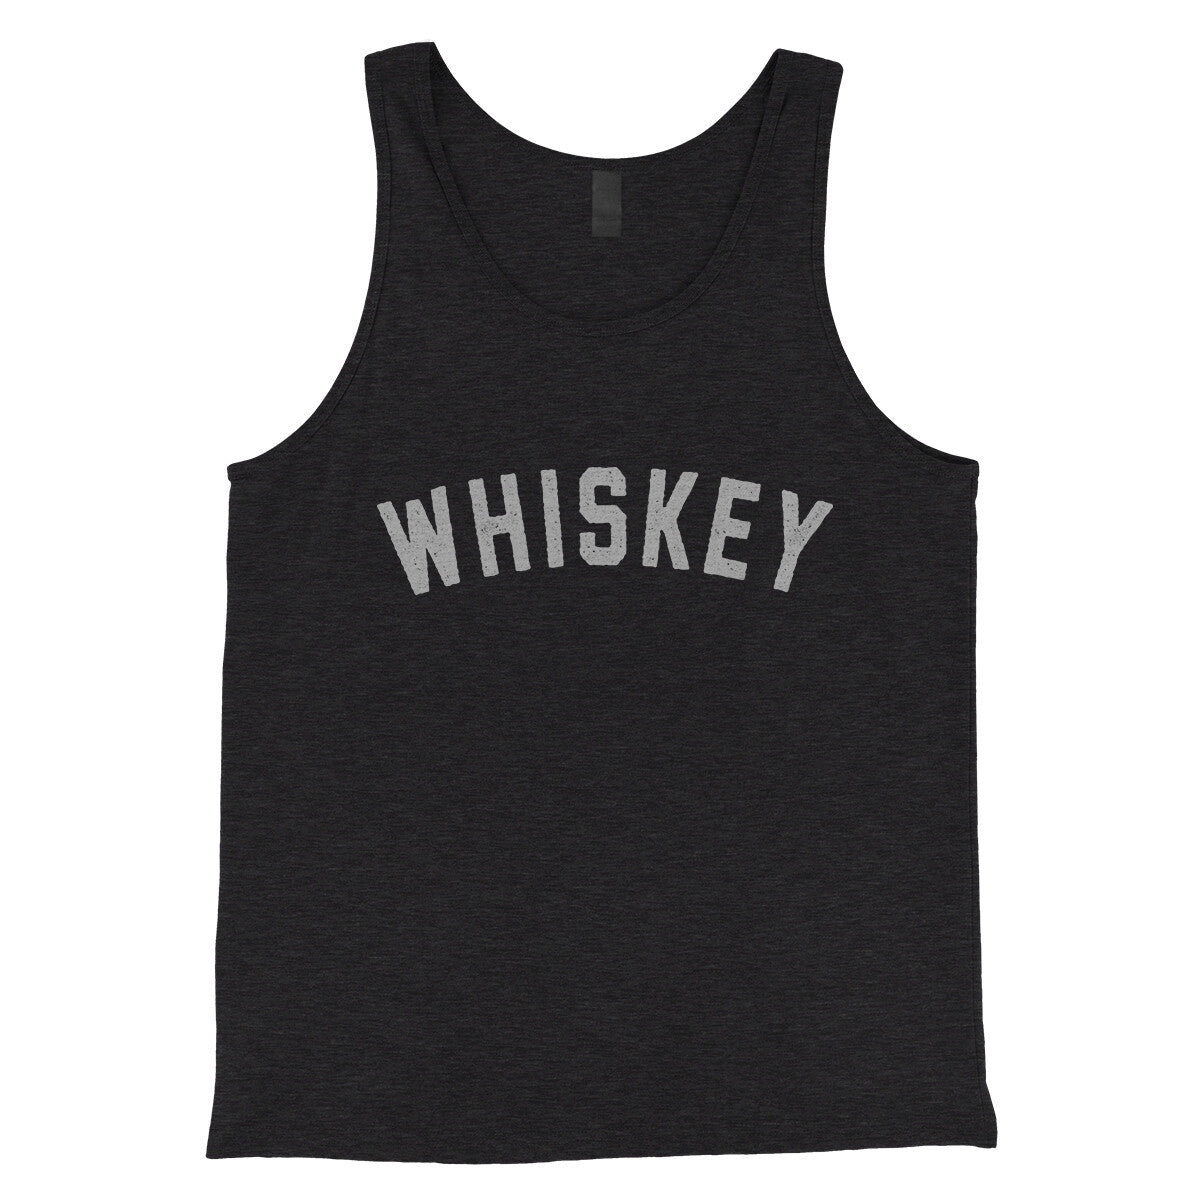 Whiskey in Charcoal Black TriBlend Color